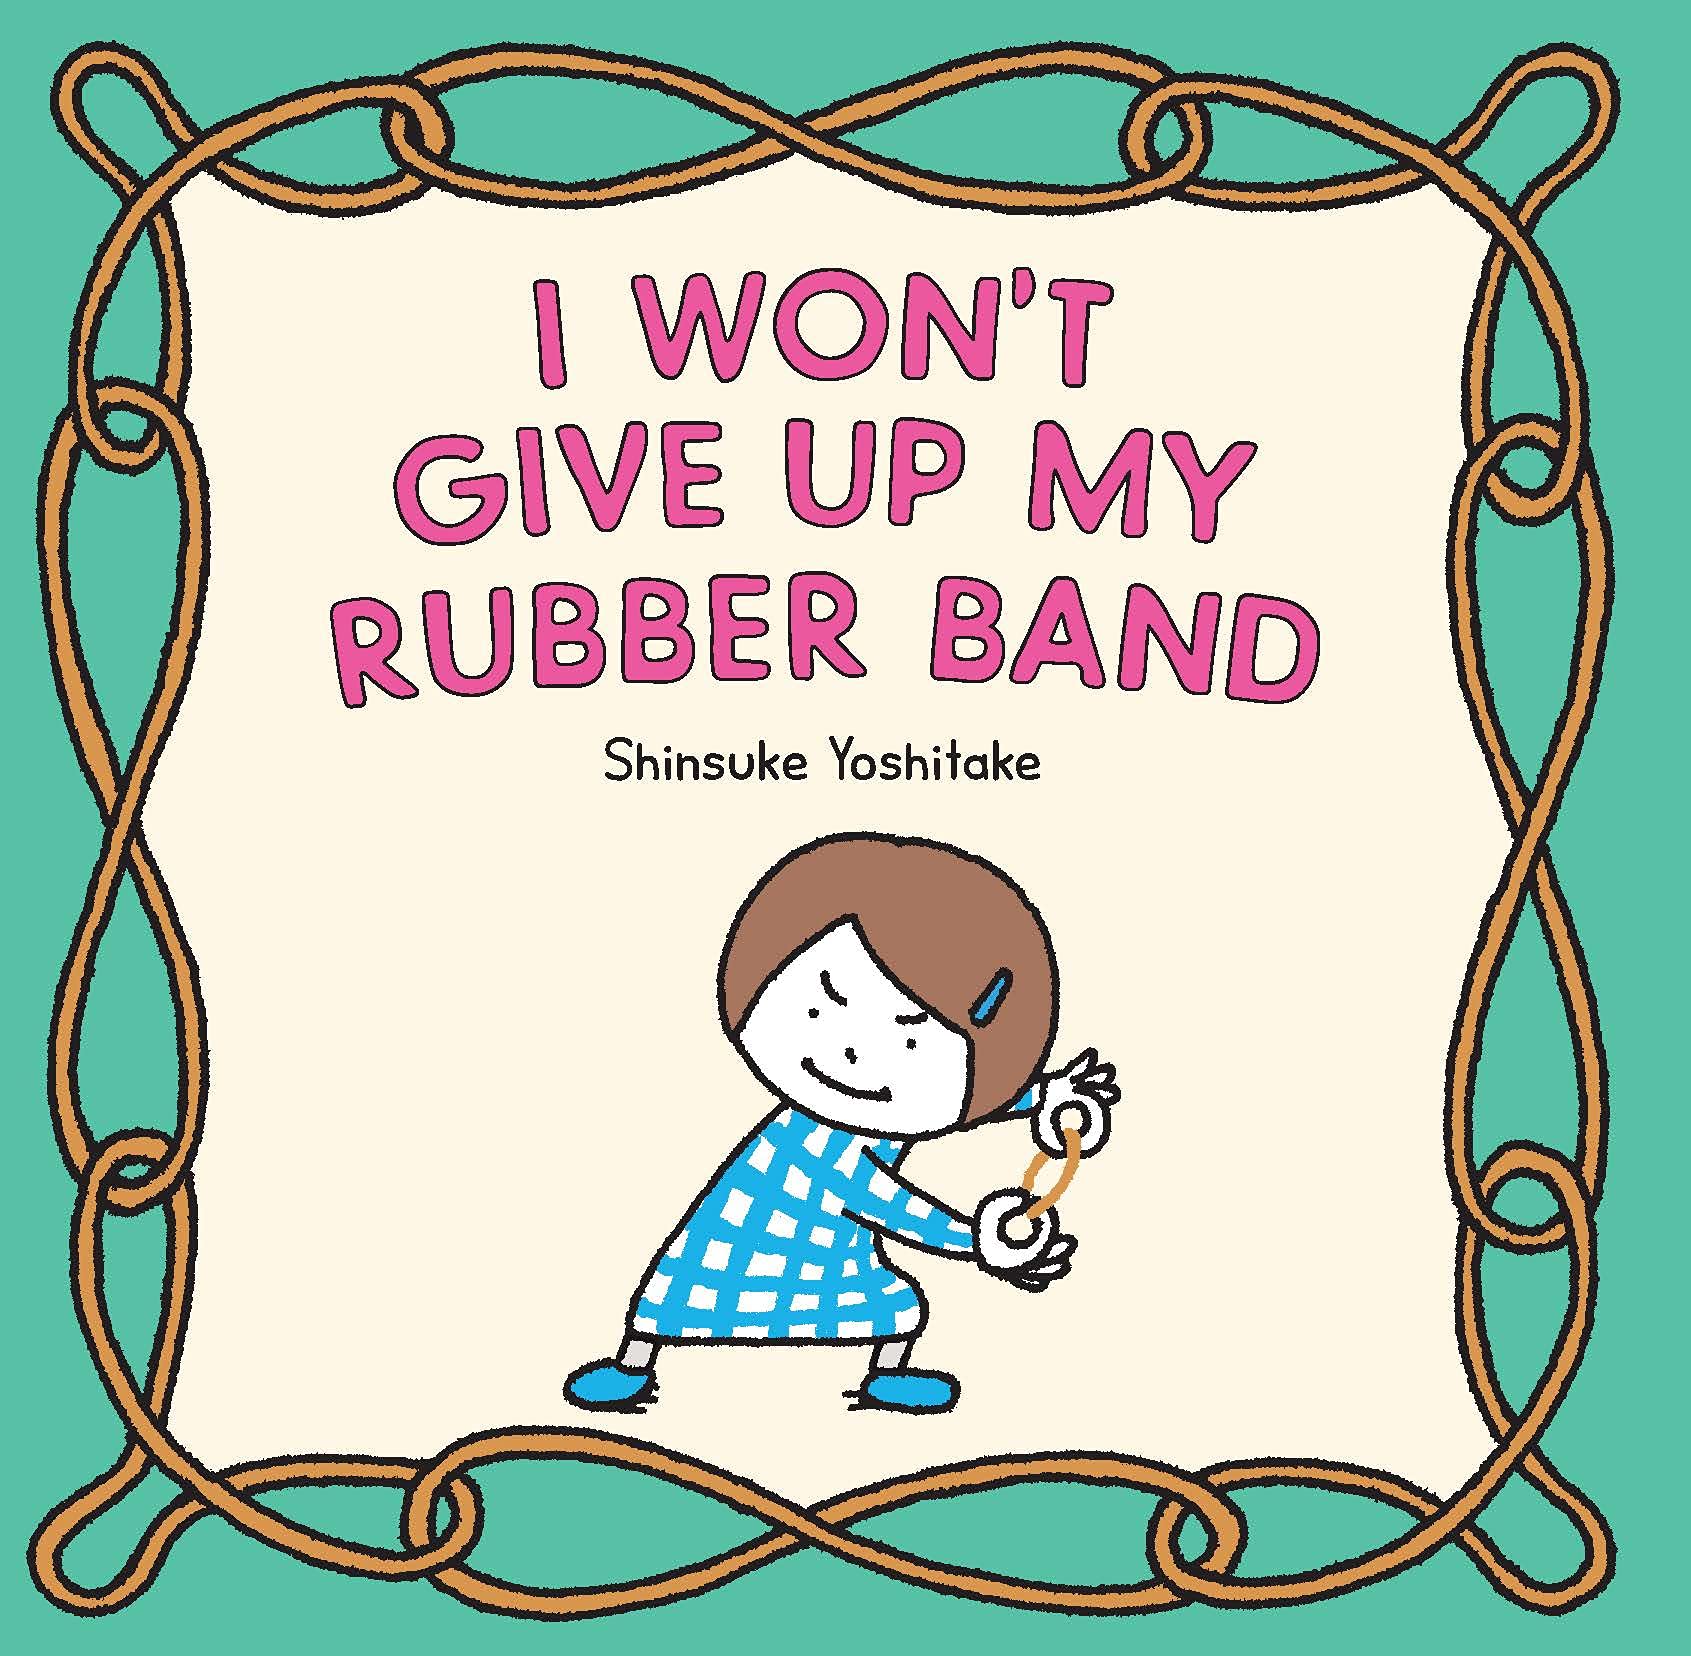 Image for "I Won't Give Up My Rubber Band"